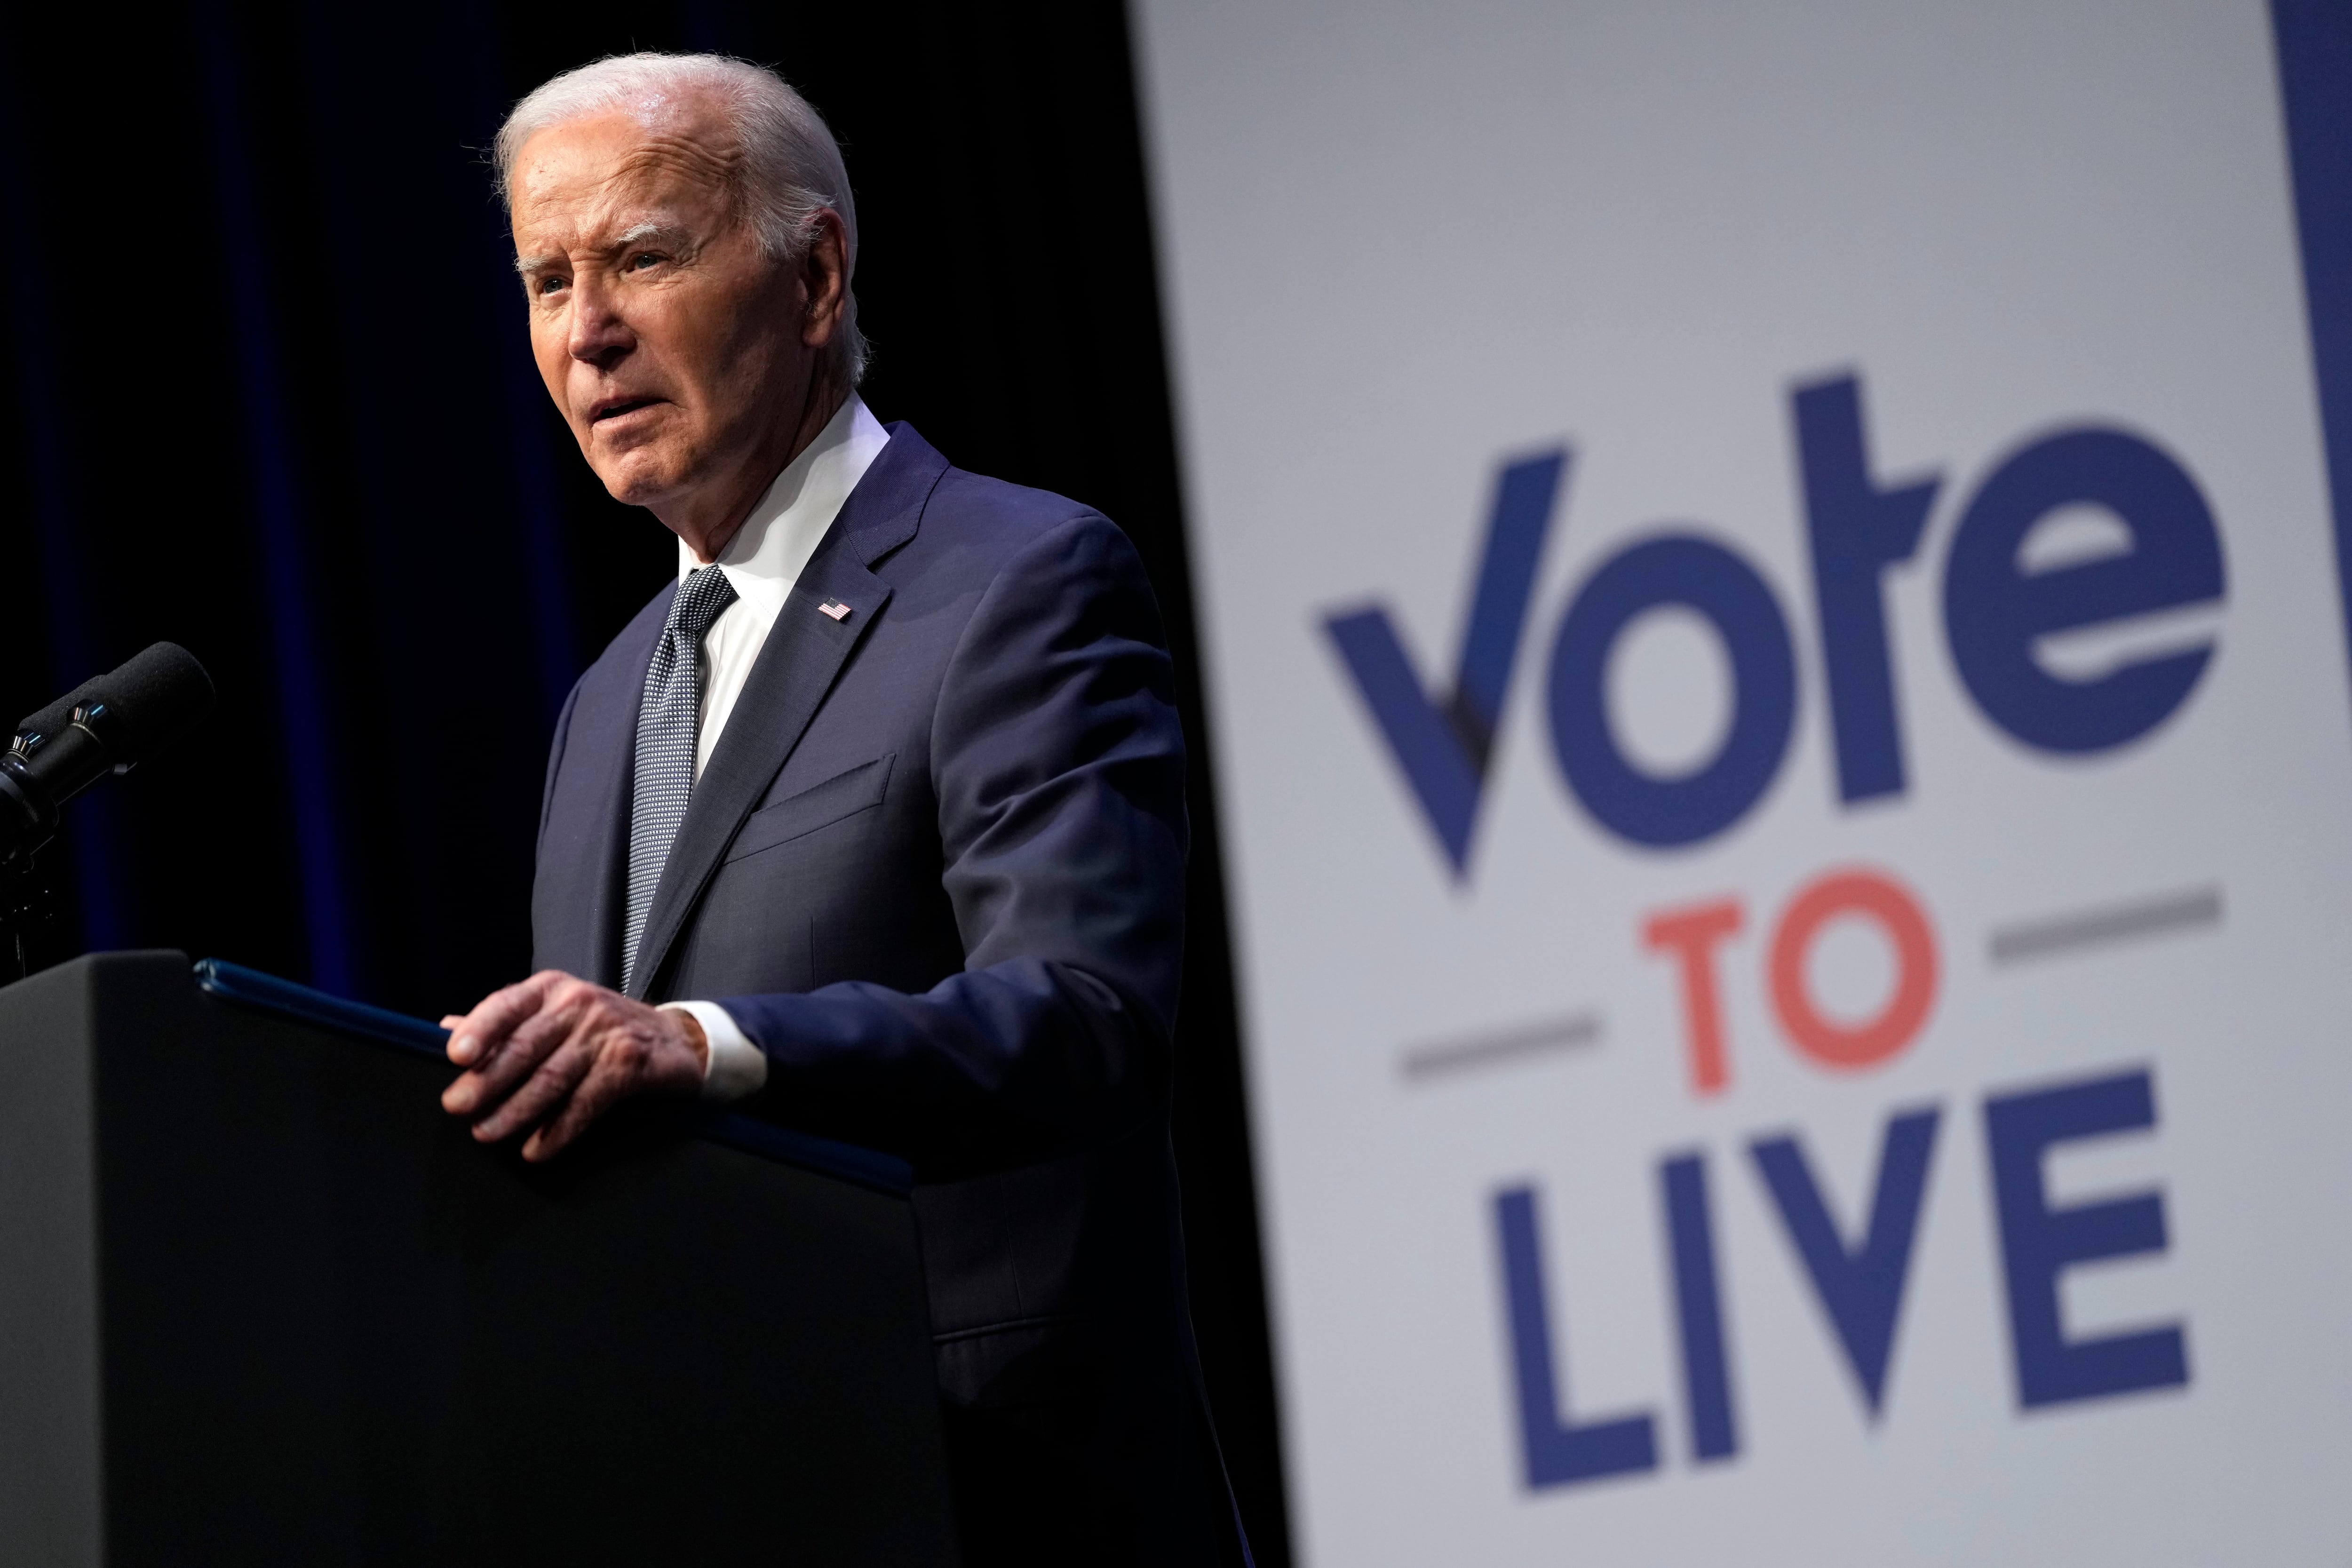 Biden's ability to win back skeptical Democrats is tested at a perilous moment for his campaign